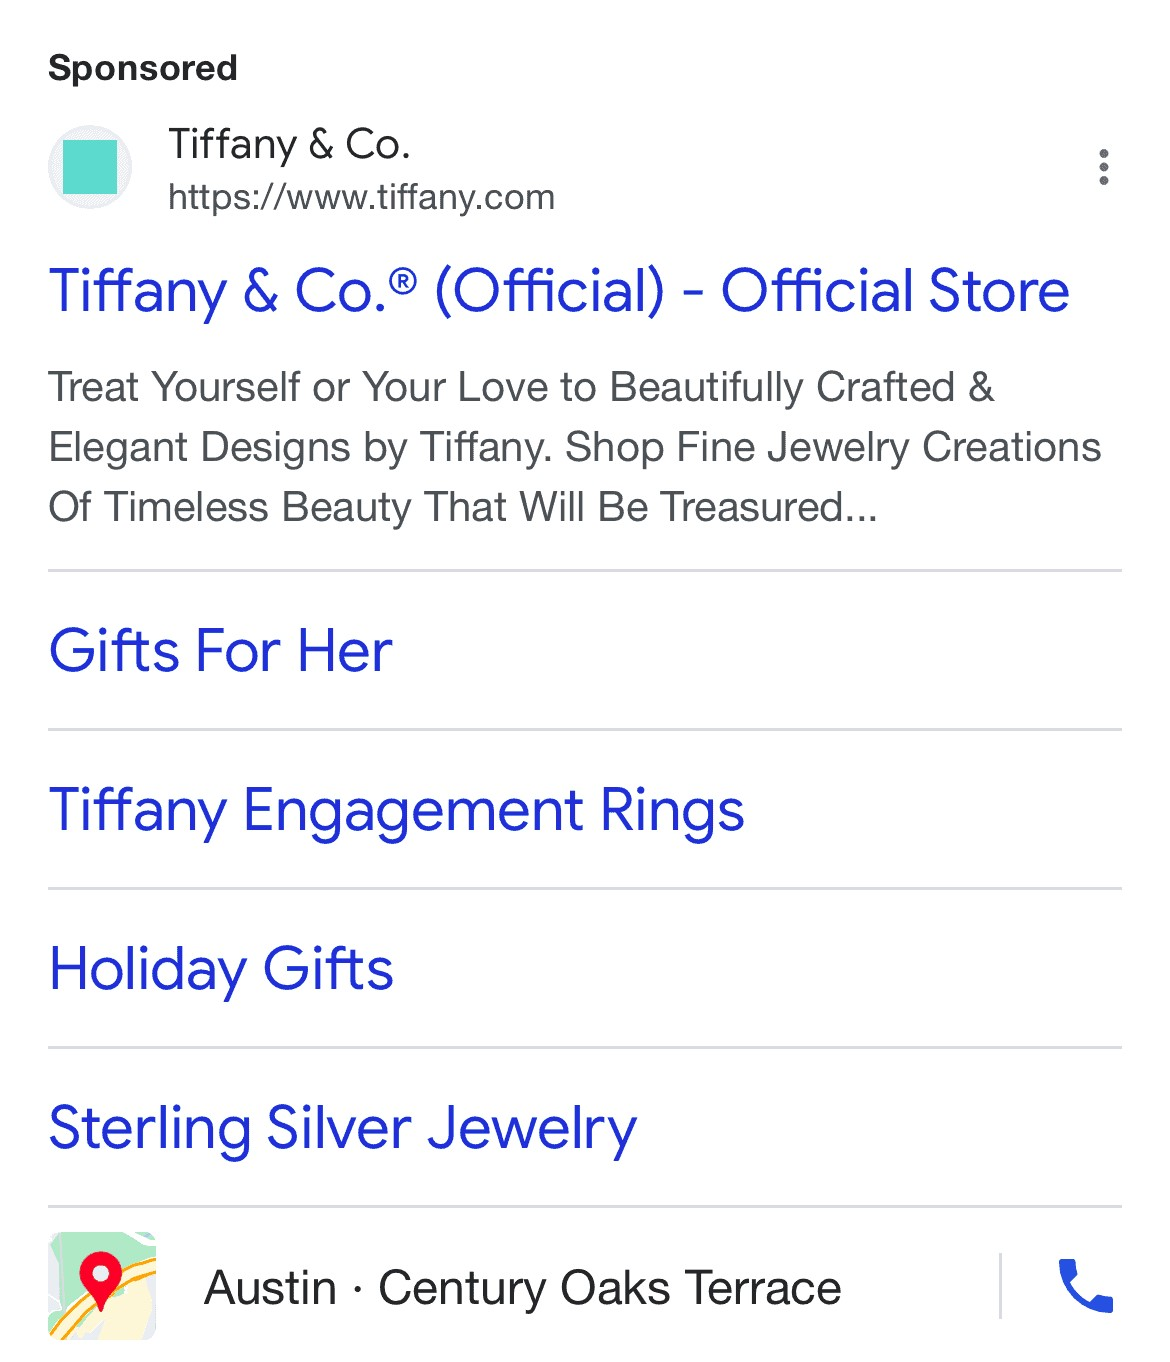 Tiffany & Co.'s google search mobile ad displayed to users in Austin, Texas